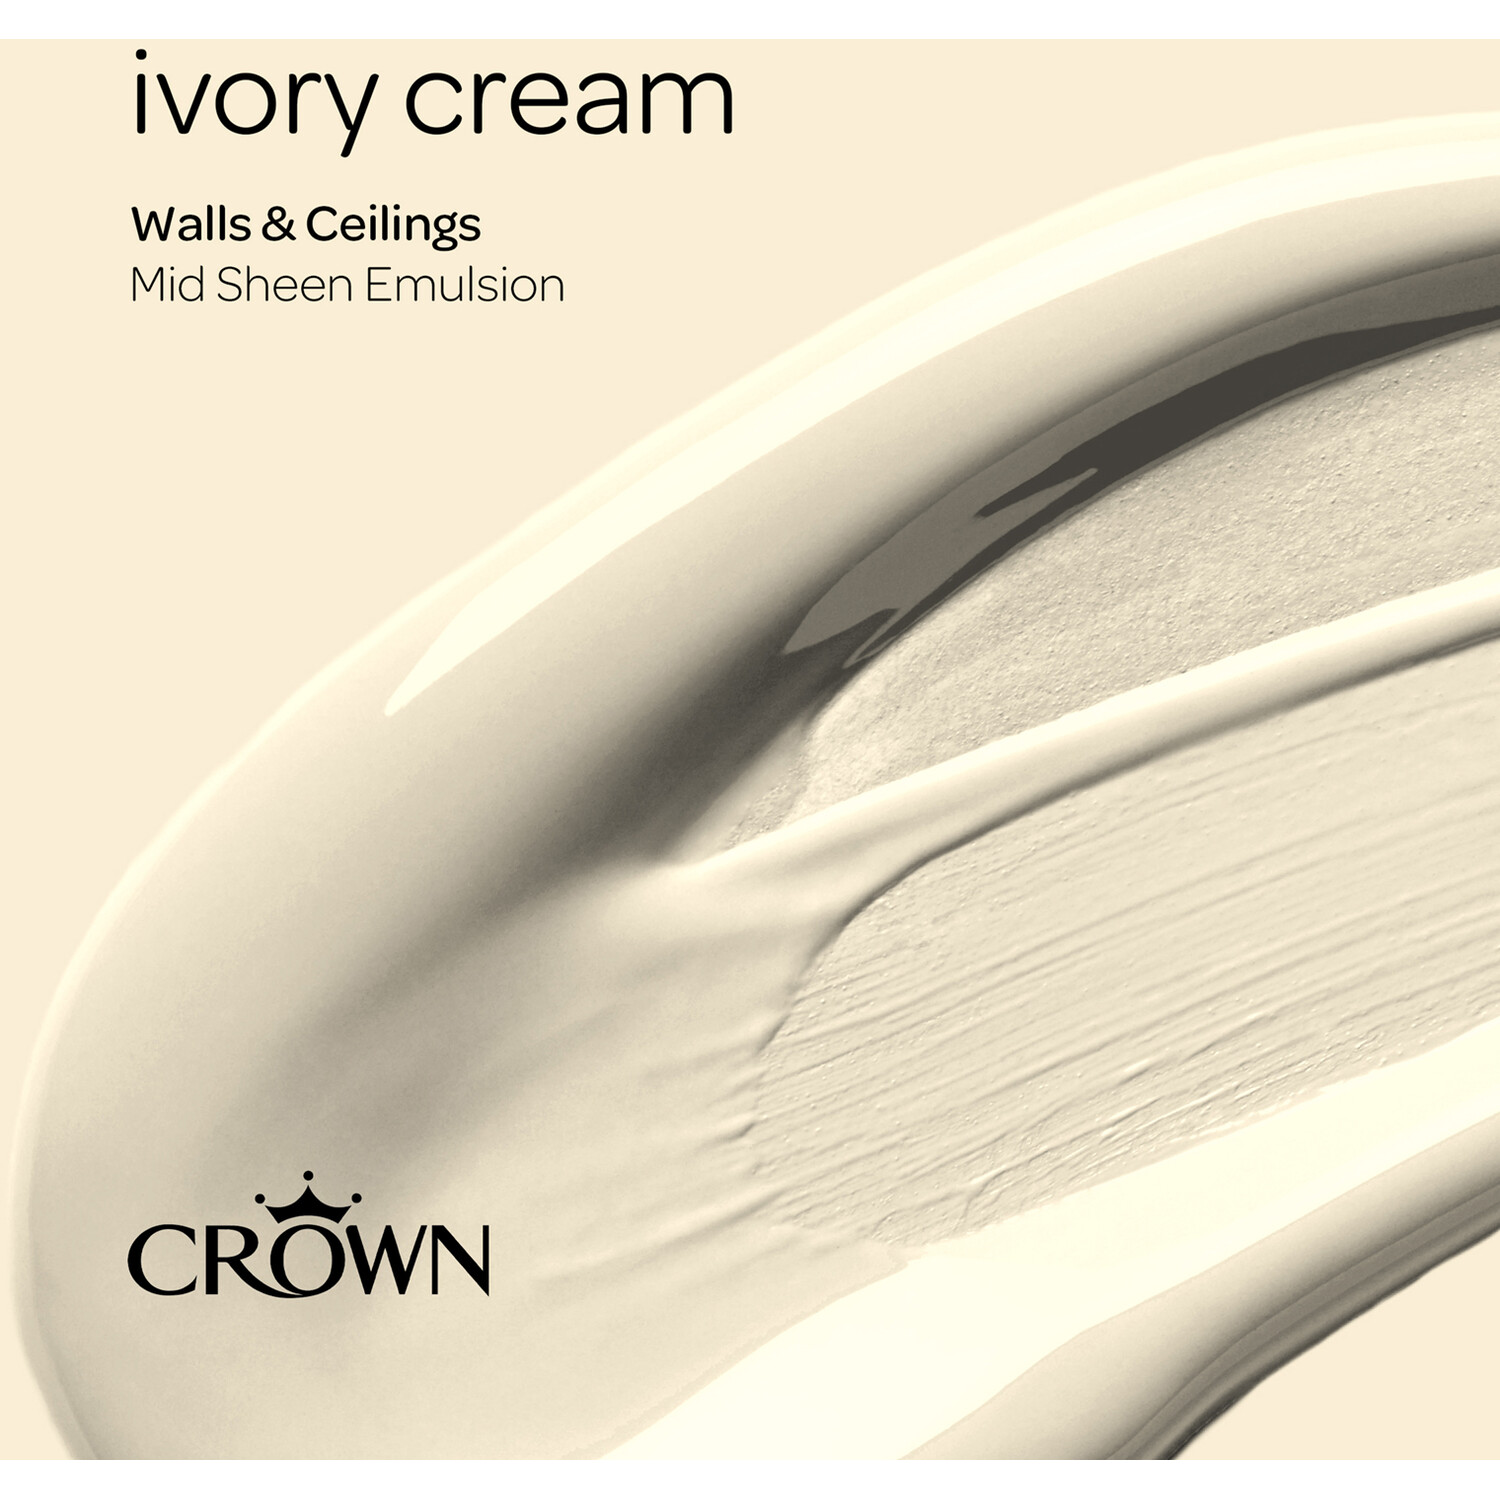 Crown Walls & Ceilings Ivory Cream Mid Sheen Emulsion Paint 5L Image 4